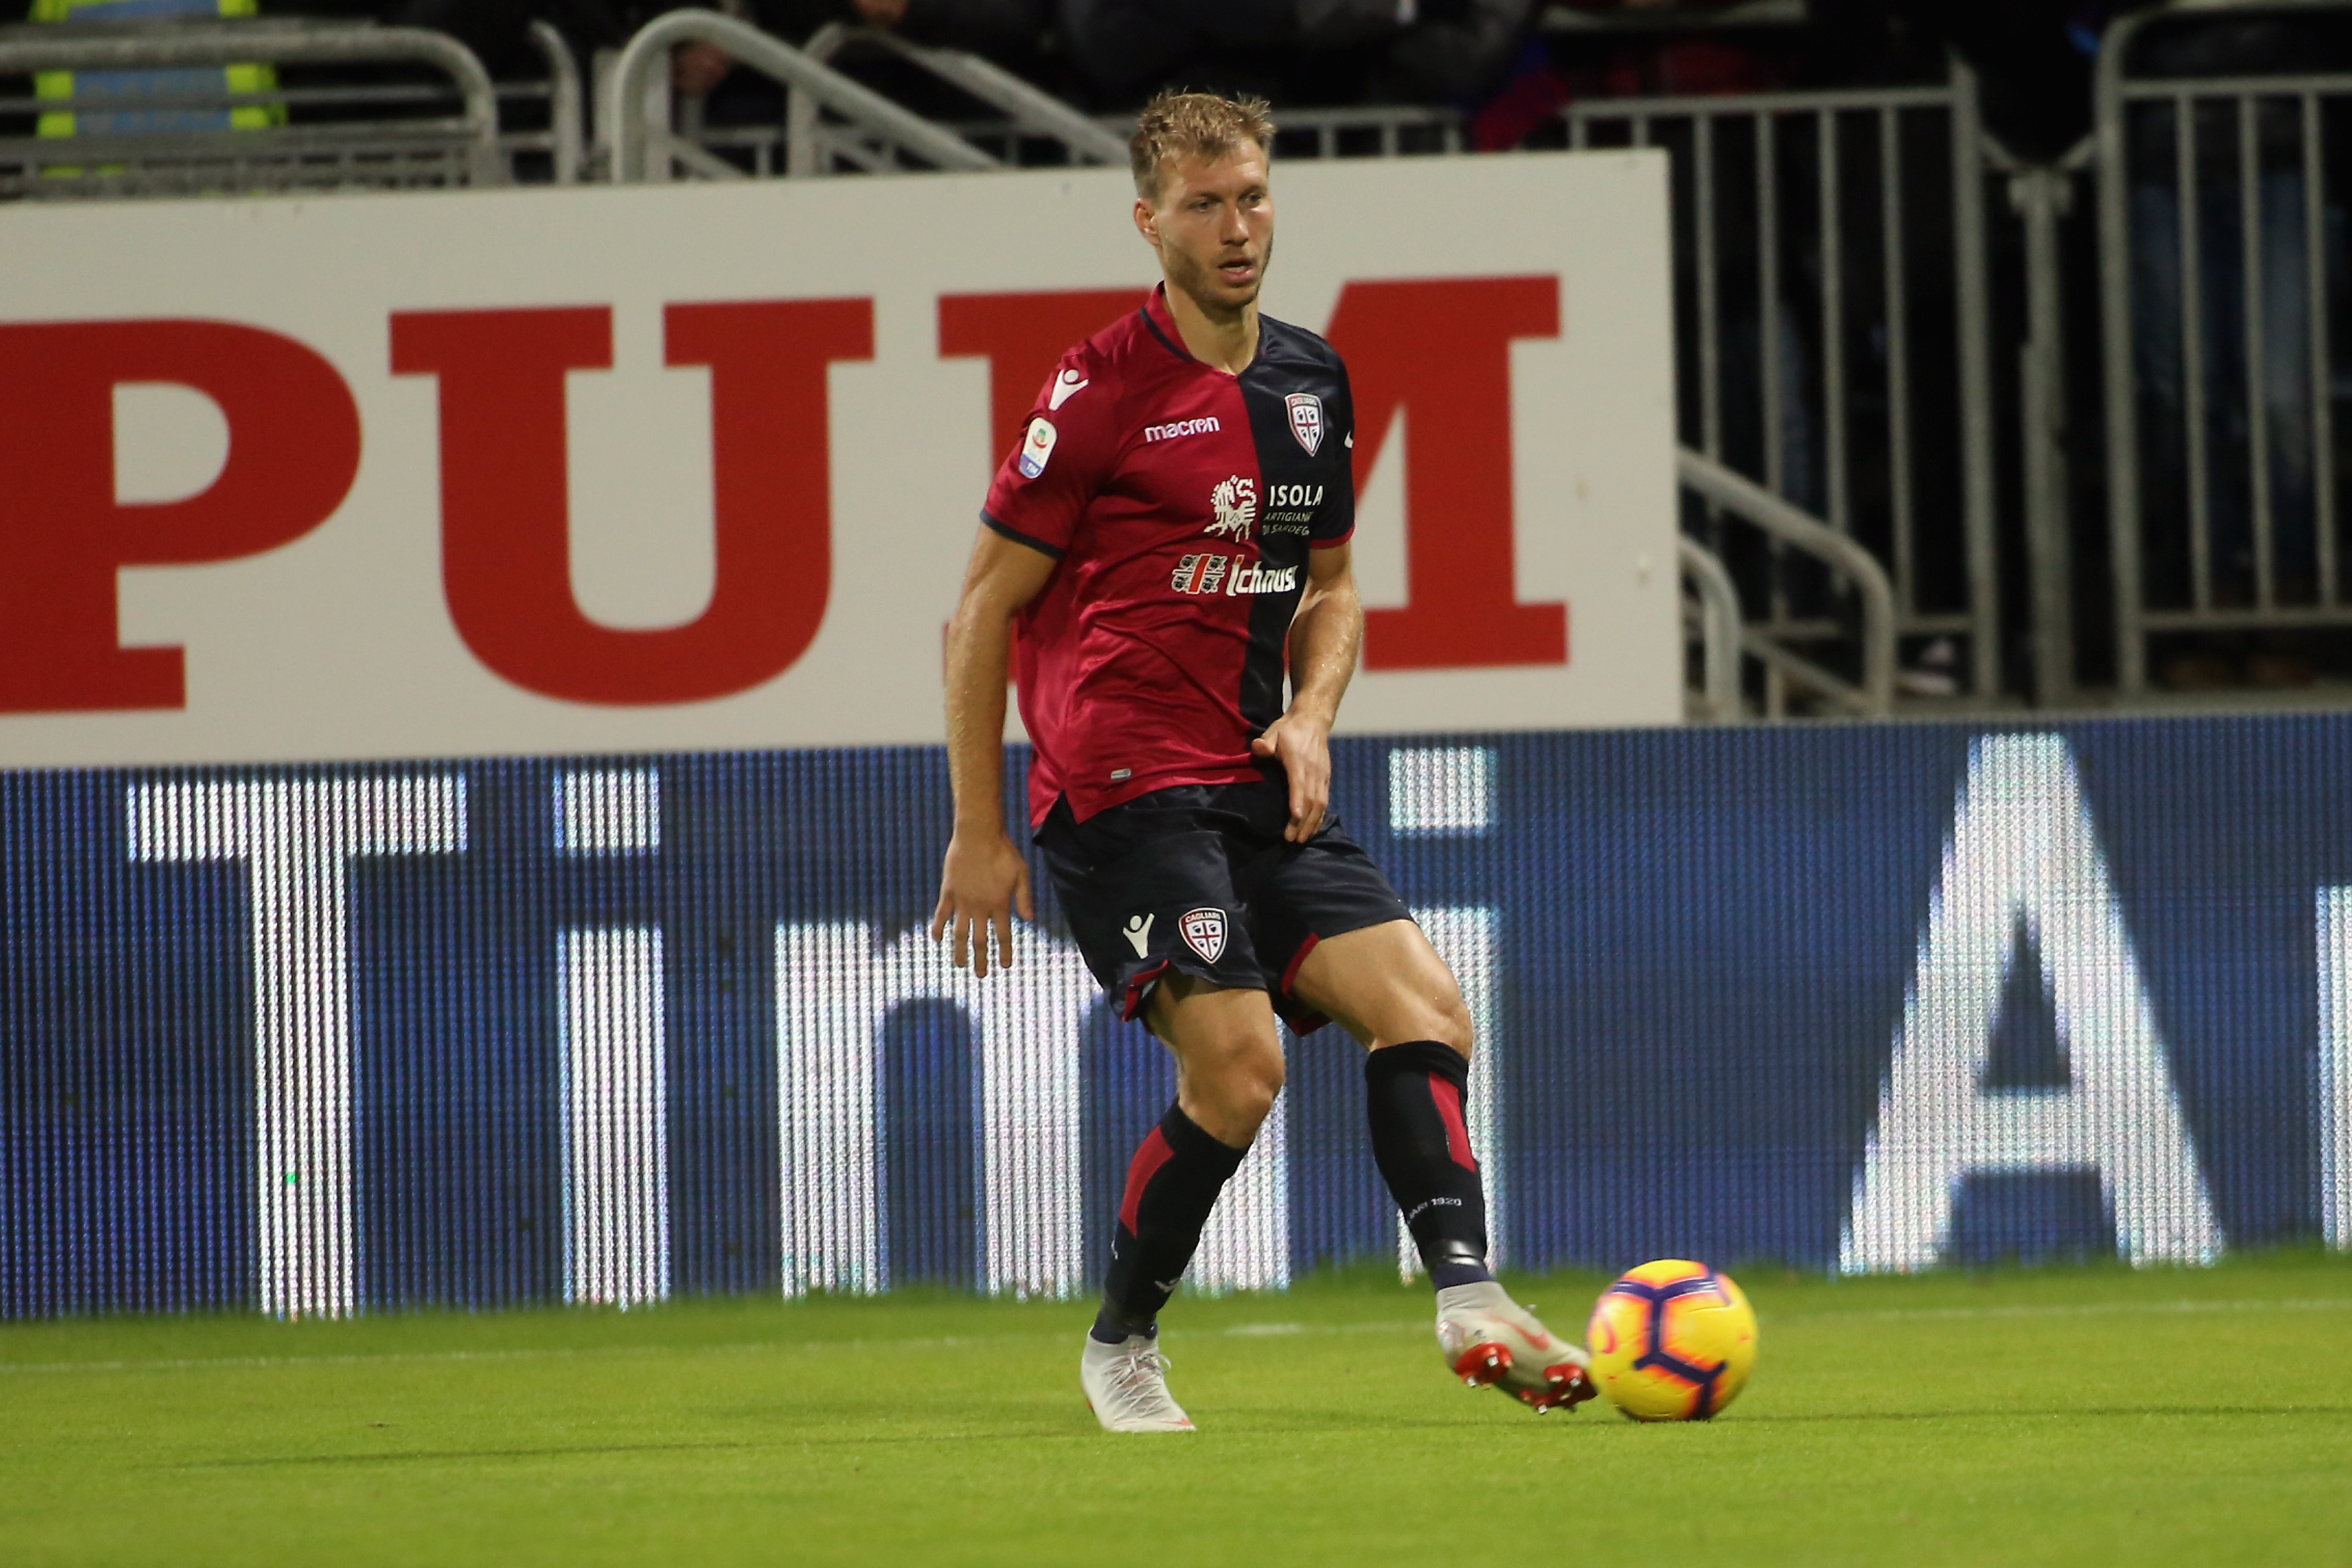 CAGLIARI, ITALY - DECEMBER 16:  Ragnar Klavan of Cagliari in action  during the Serie A match between Cagliari and SSC Napoli at Sardegna Arena on December 16, 2018 in Cagliari, Italy.  (Photo by Enrico Locci/Getty Images)